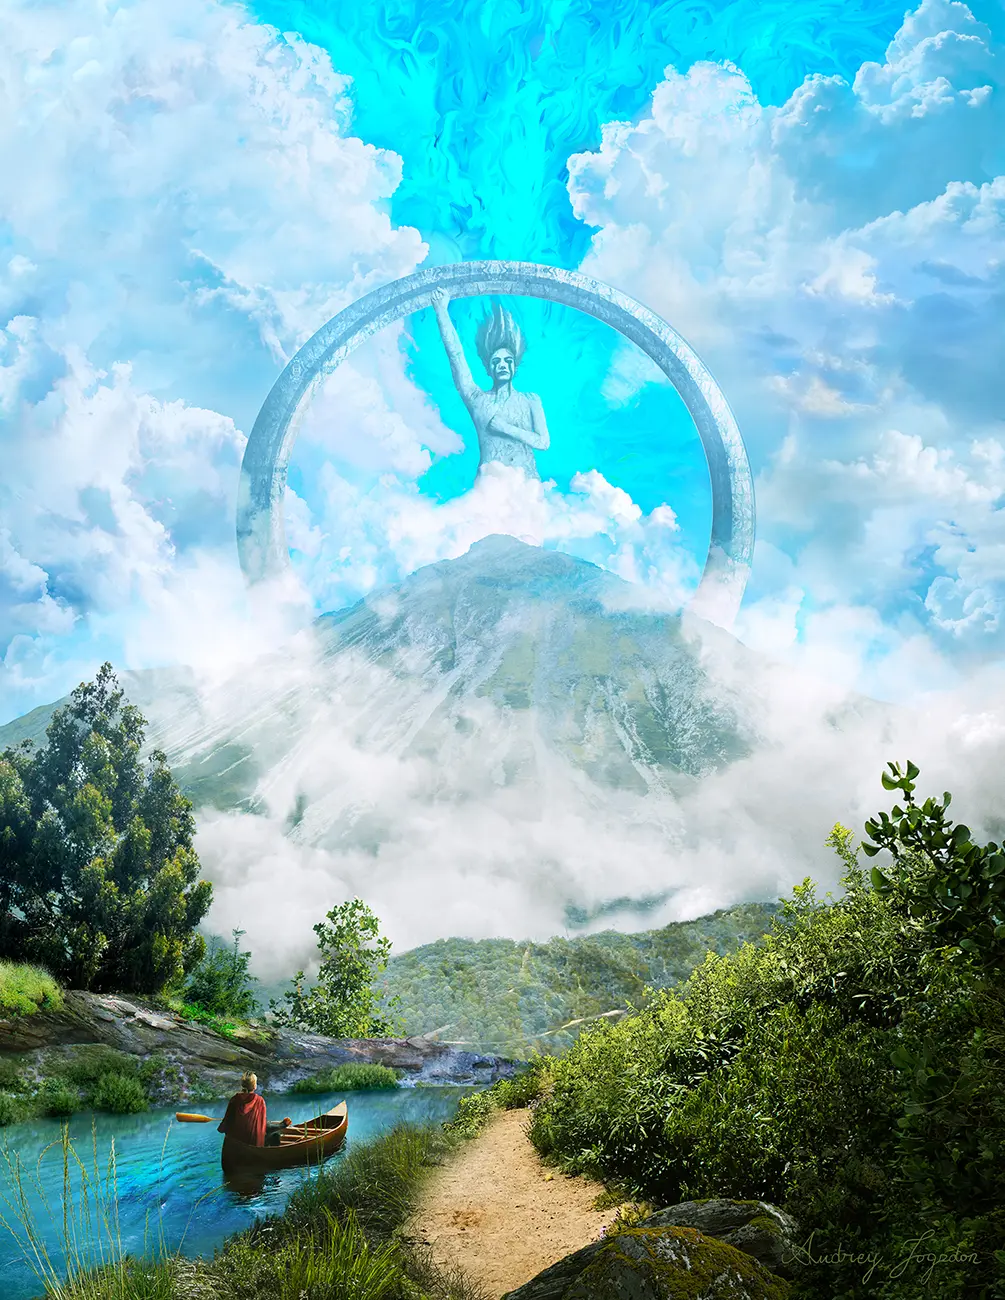 A psychedelic display of magical disturbance in a cerulean sky lies behind a towering ring of stone. Within the ring, there is an equally gigantic statue of a nude androgynous figure, their one hand crossed over their chest and their other raised in a fist toward the sky. A mist-adorned mountain covers the bottom of the monument, which is looked on by a figure kayaking through the vibrant waters of a river, surrounded by lush plants.